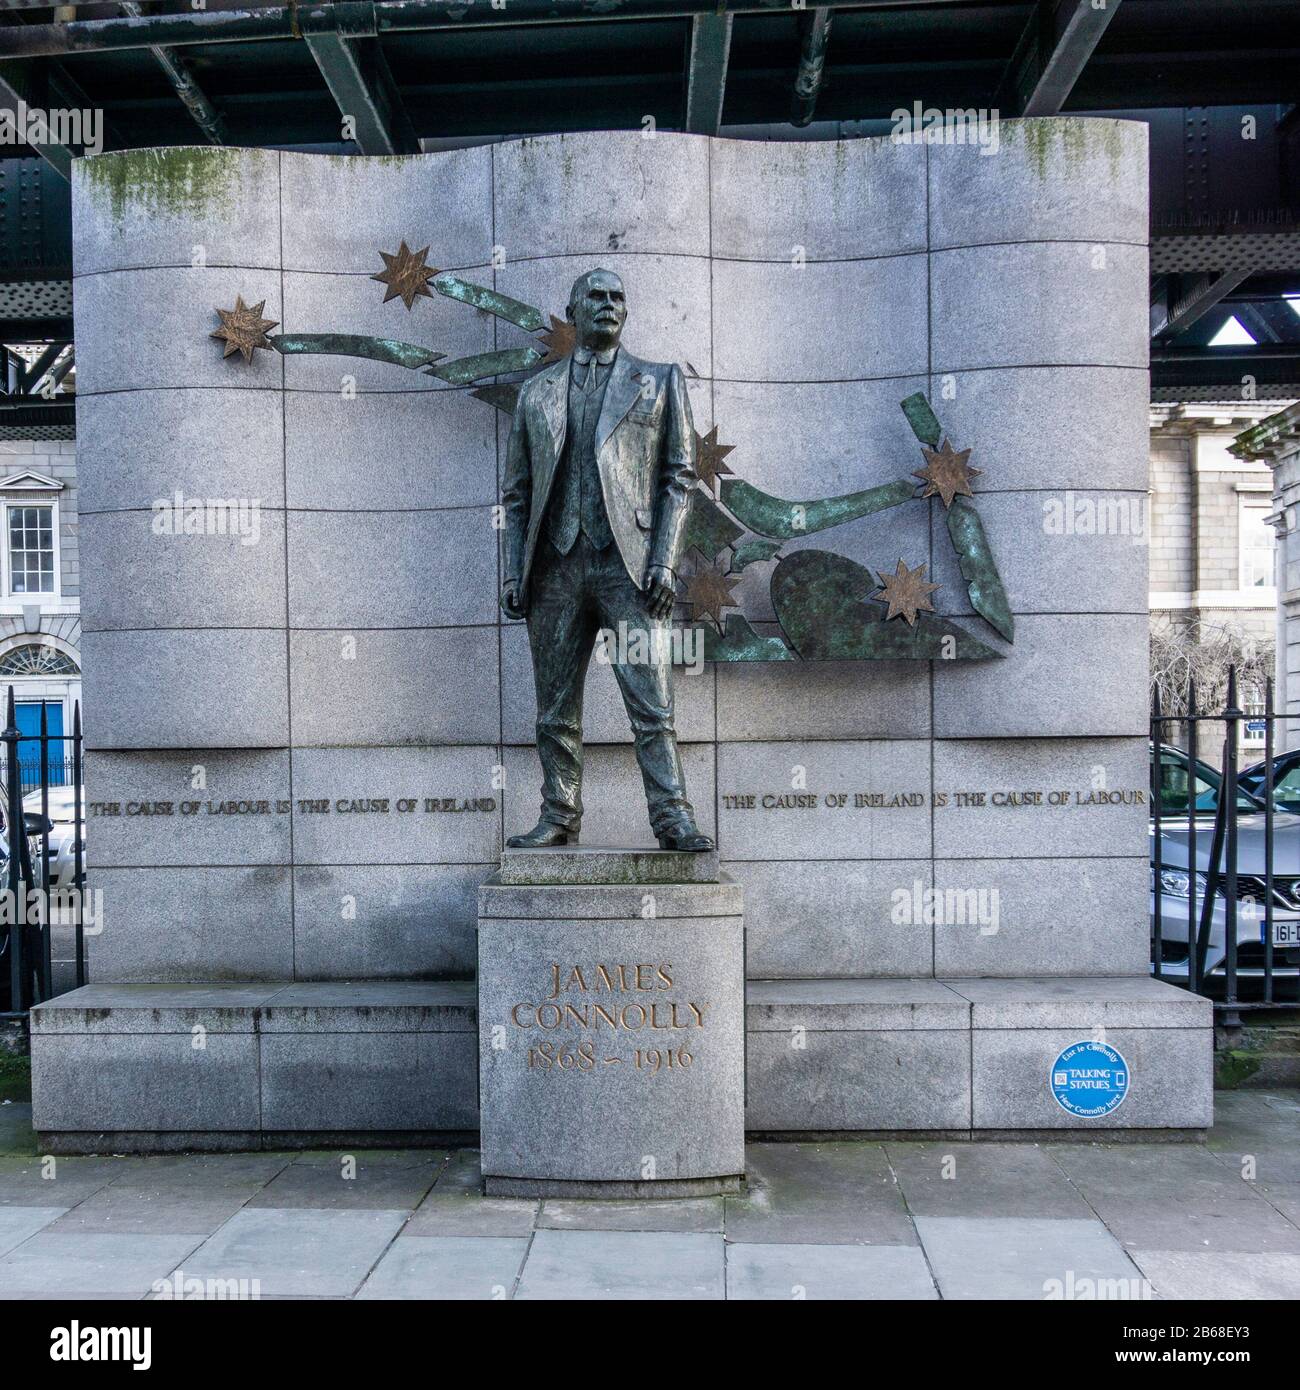 The statue of James Connolly in Beresford Place, Dublin, Ireland, opposite Liberty Hall. Connolly was executed following the 1916 Easter Rising. Stock Photo